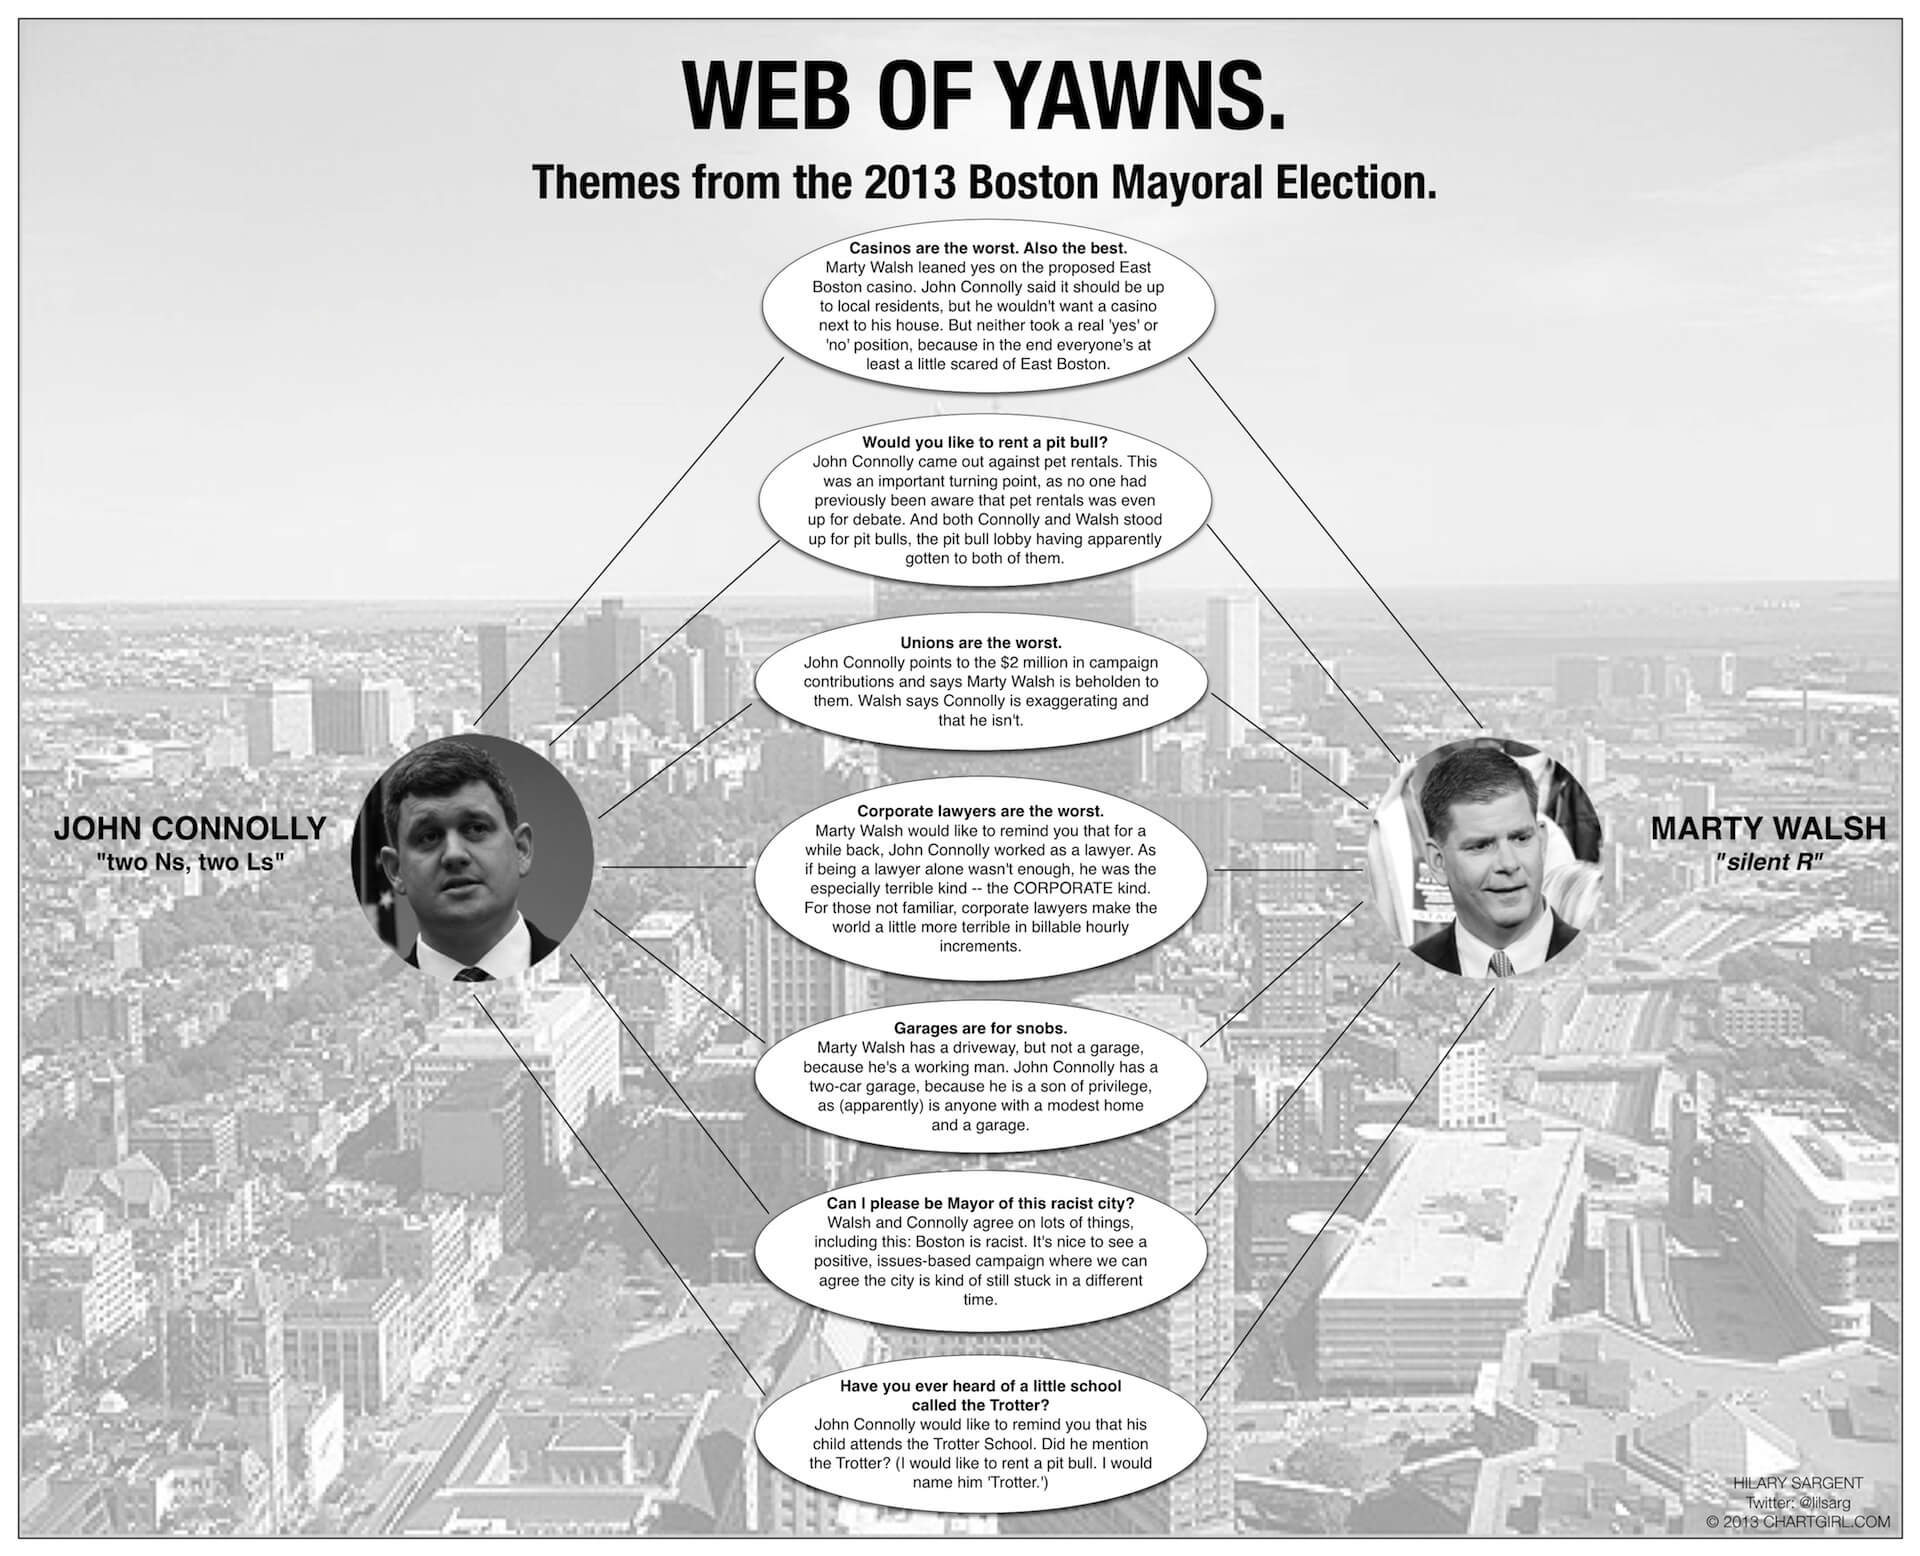 Web of Yawns: Themes from the 2013 Boston Mayoral Election.